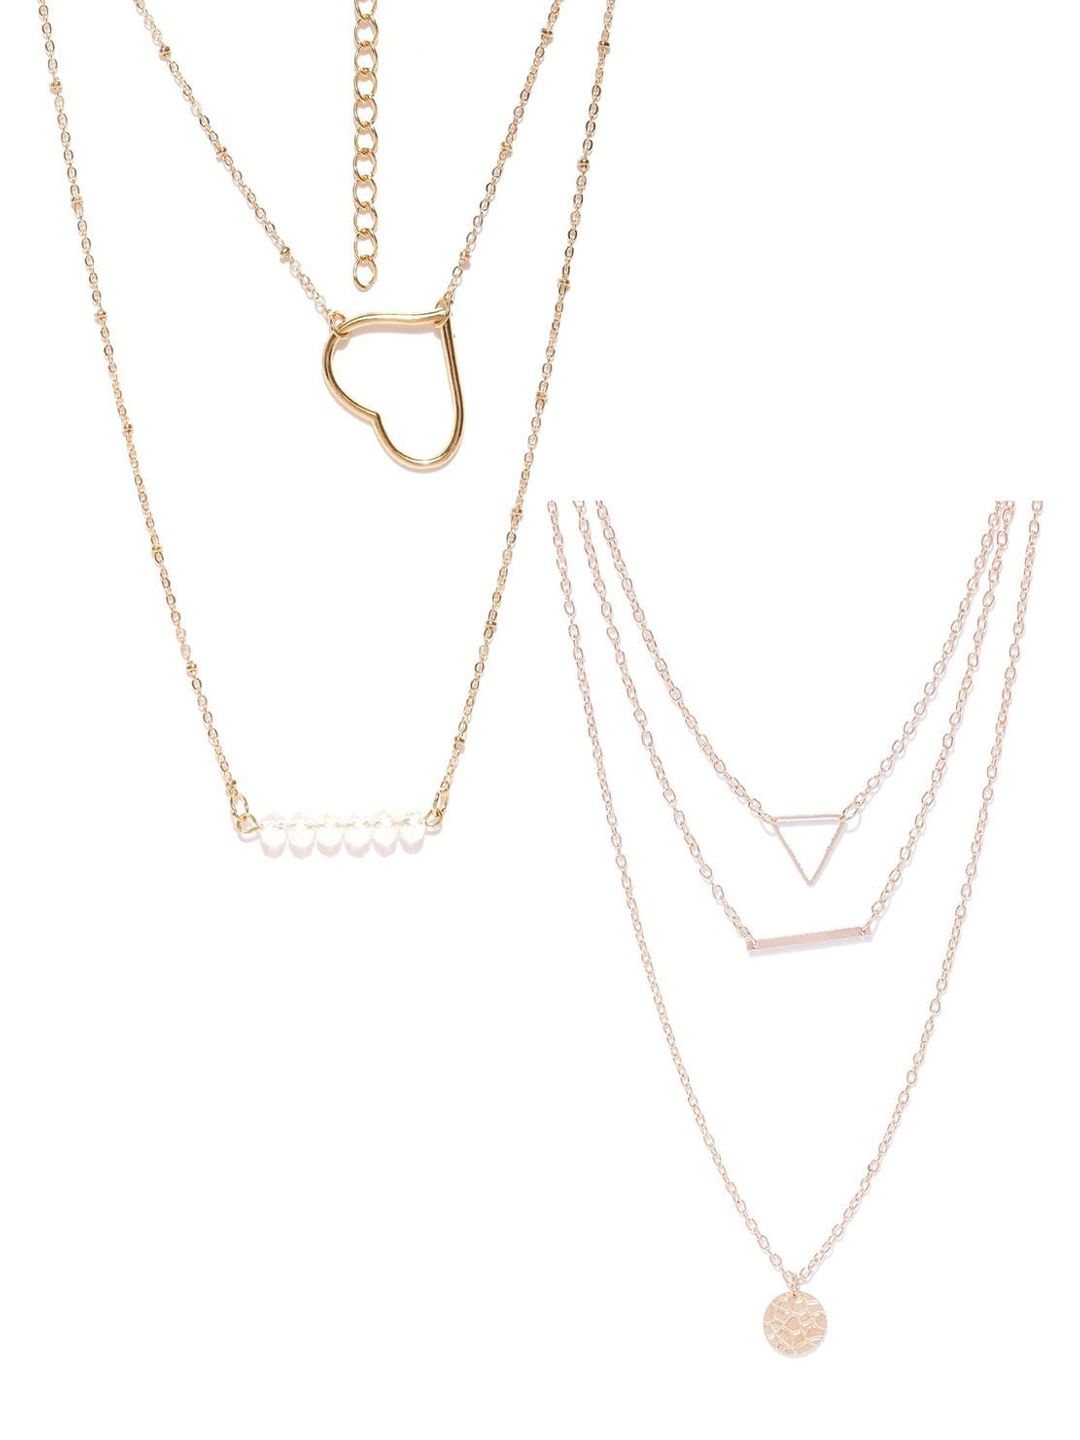 OOMPH Set of 2 Gold-Toned Layered Necklaces Price in India